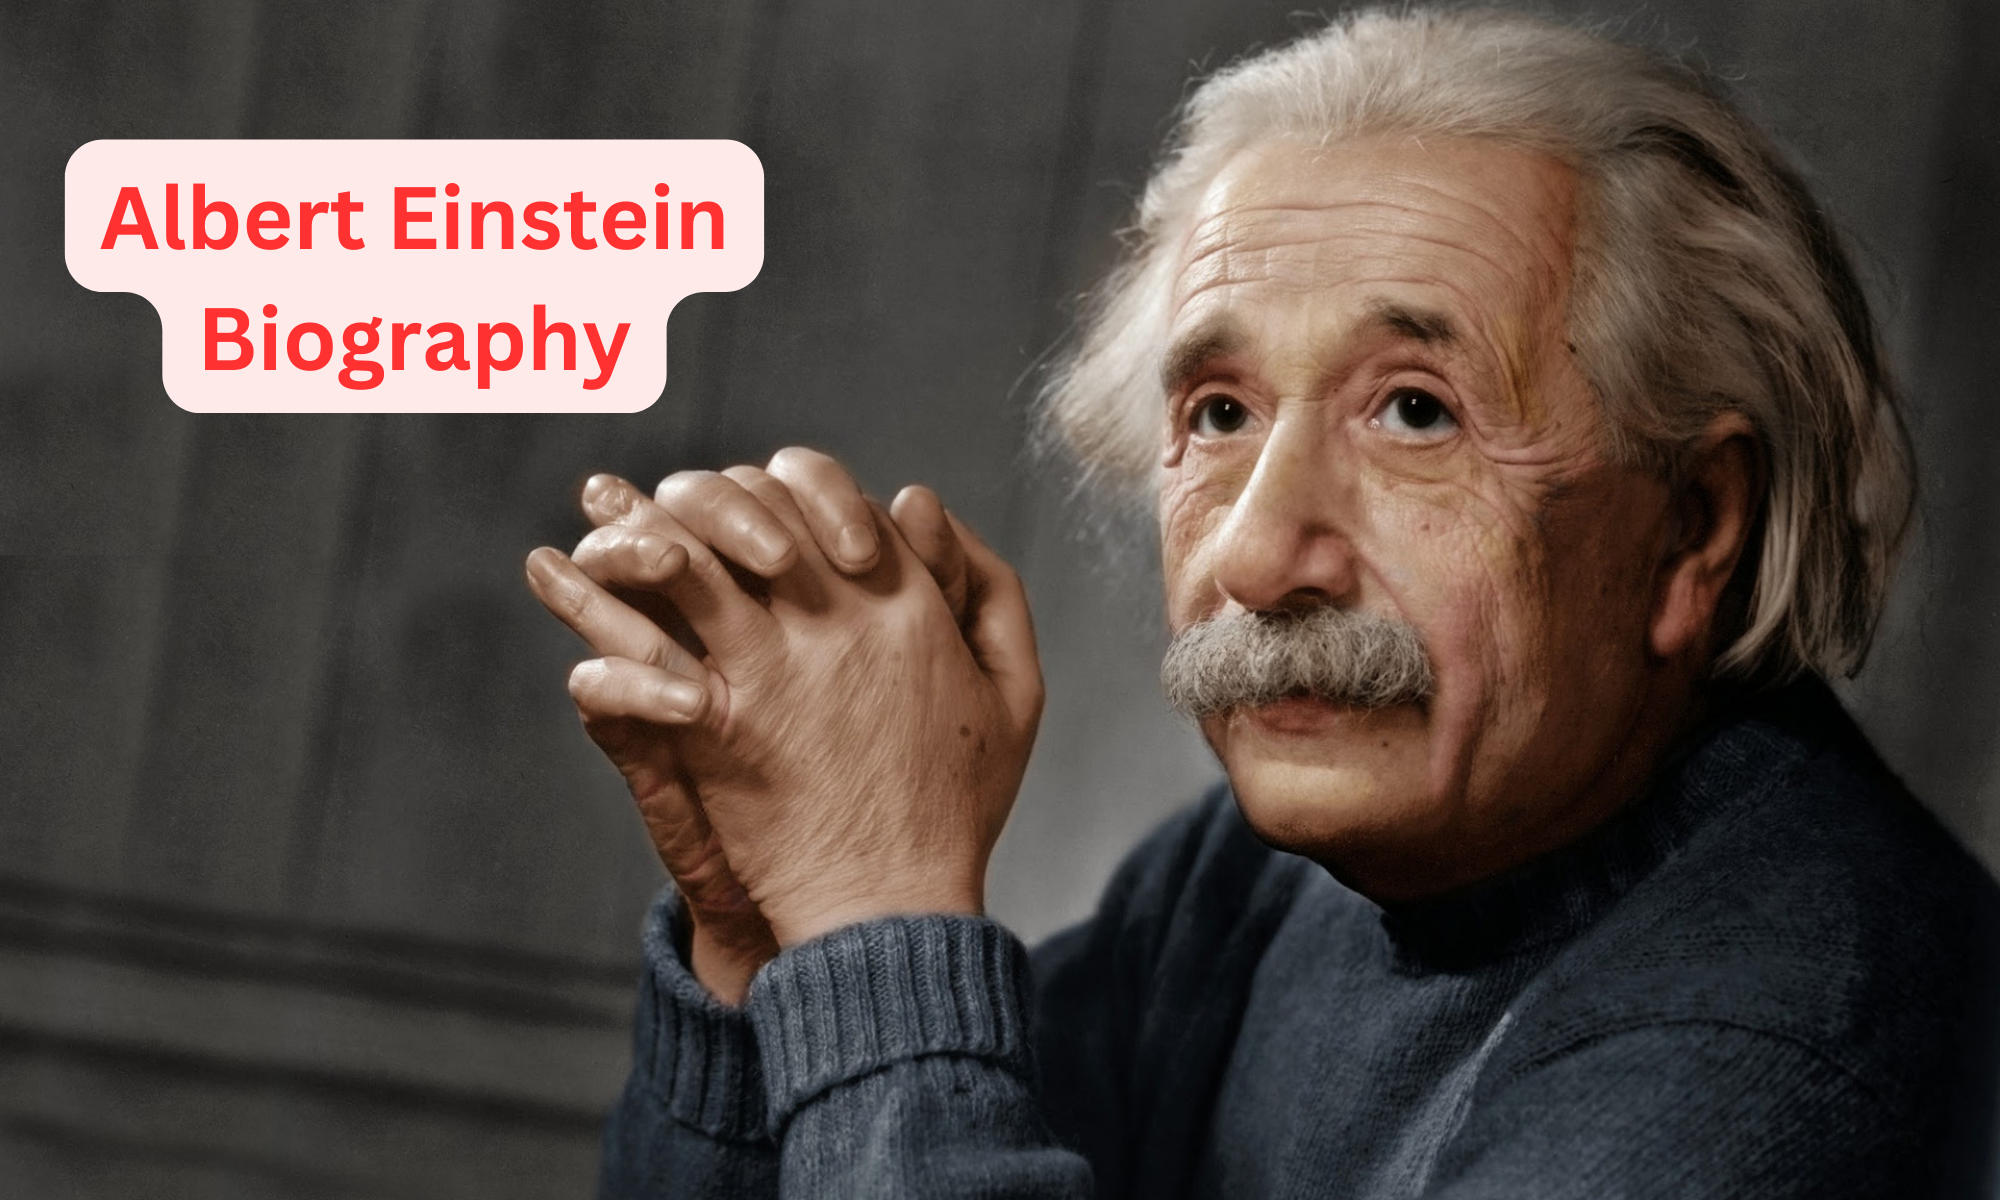 Albert Einstein Biography: Know about the father of modern physics_50.1